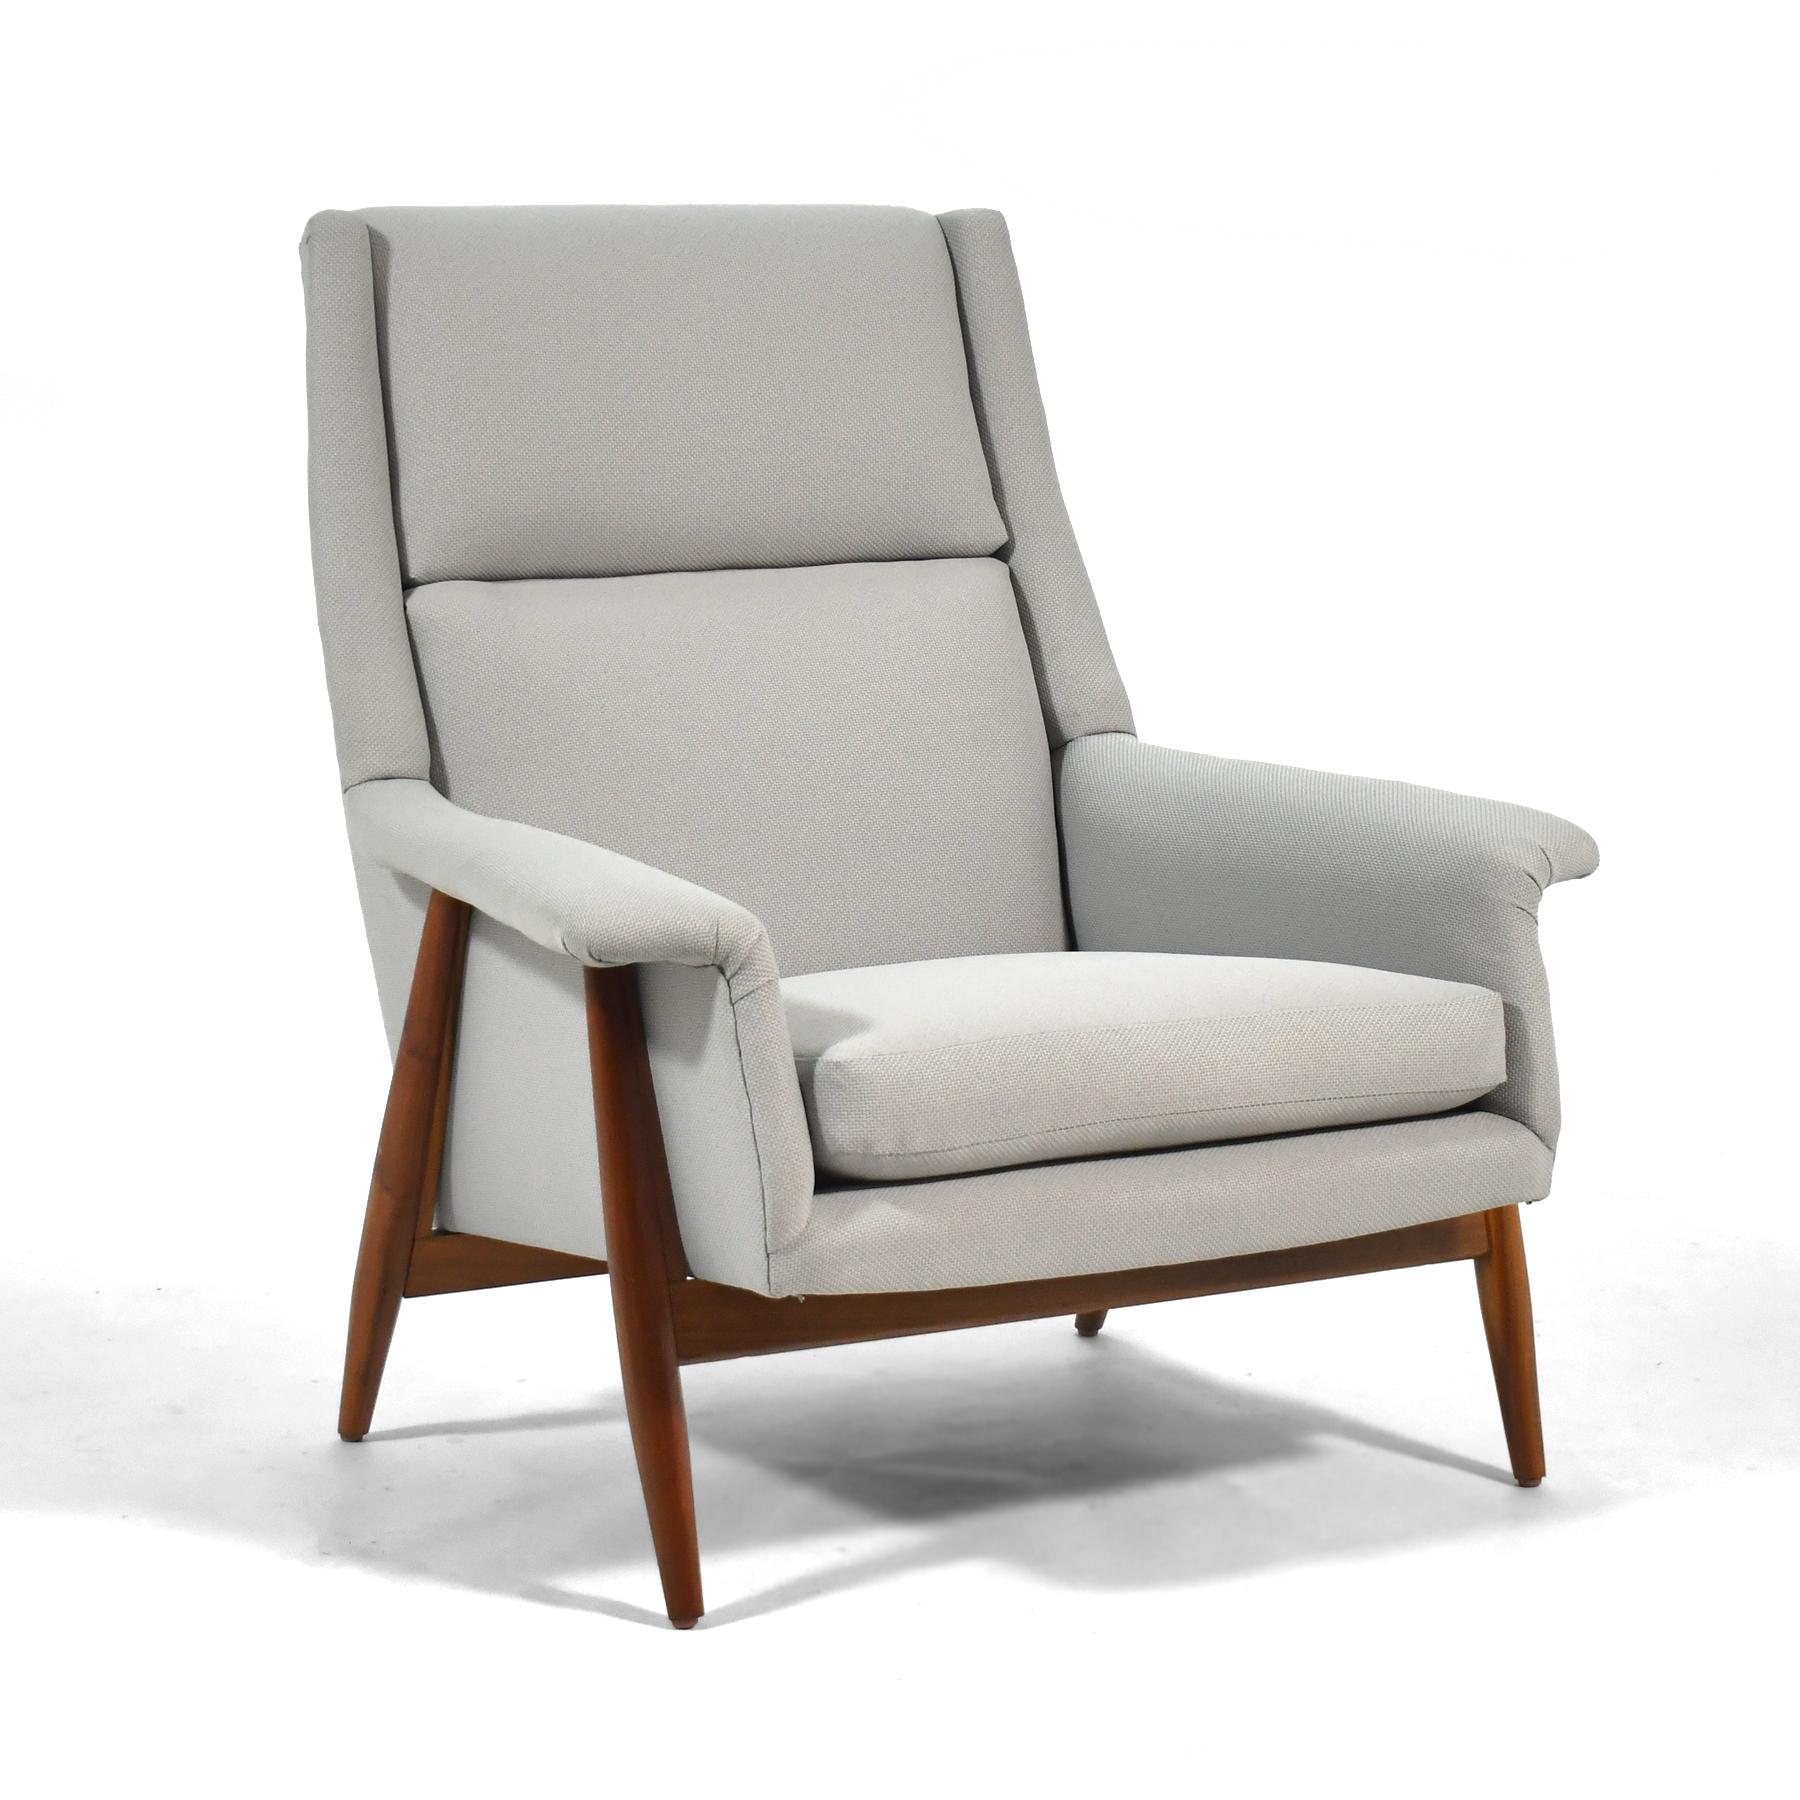 This handsome, tailored Milo Baughman design from 1958 is nick-named the 